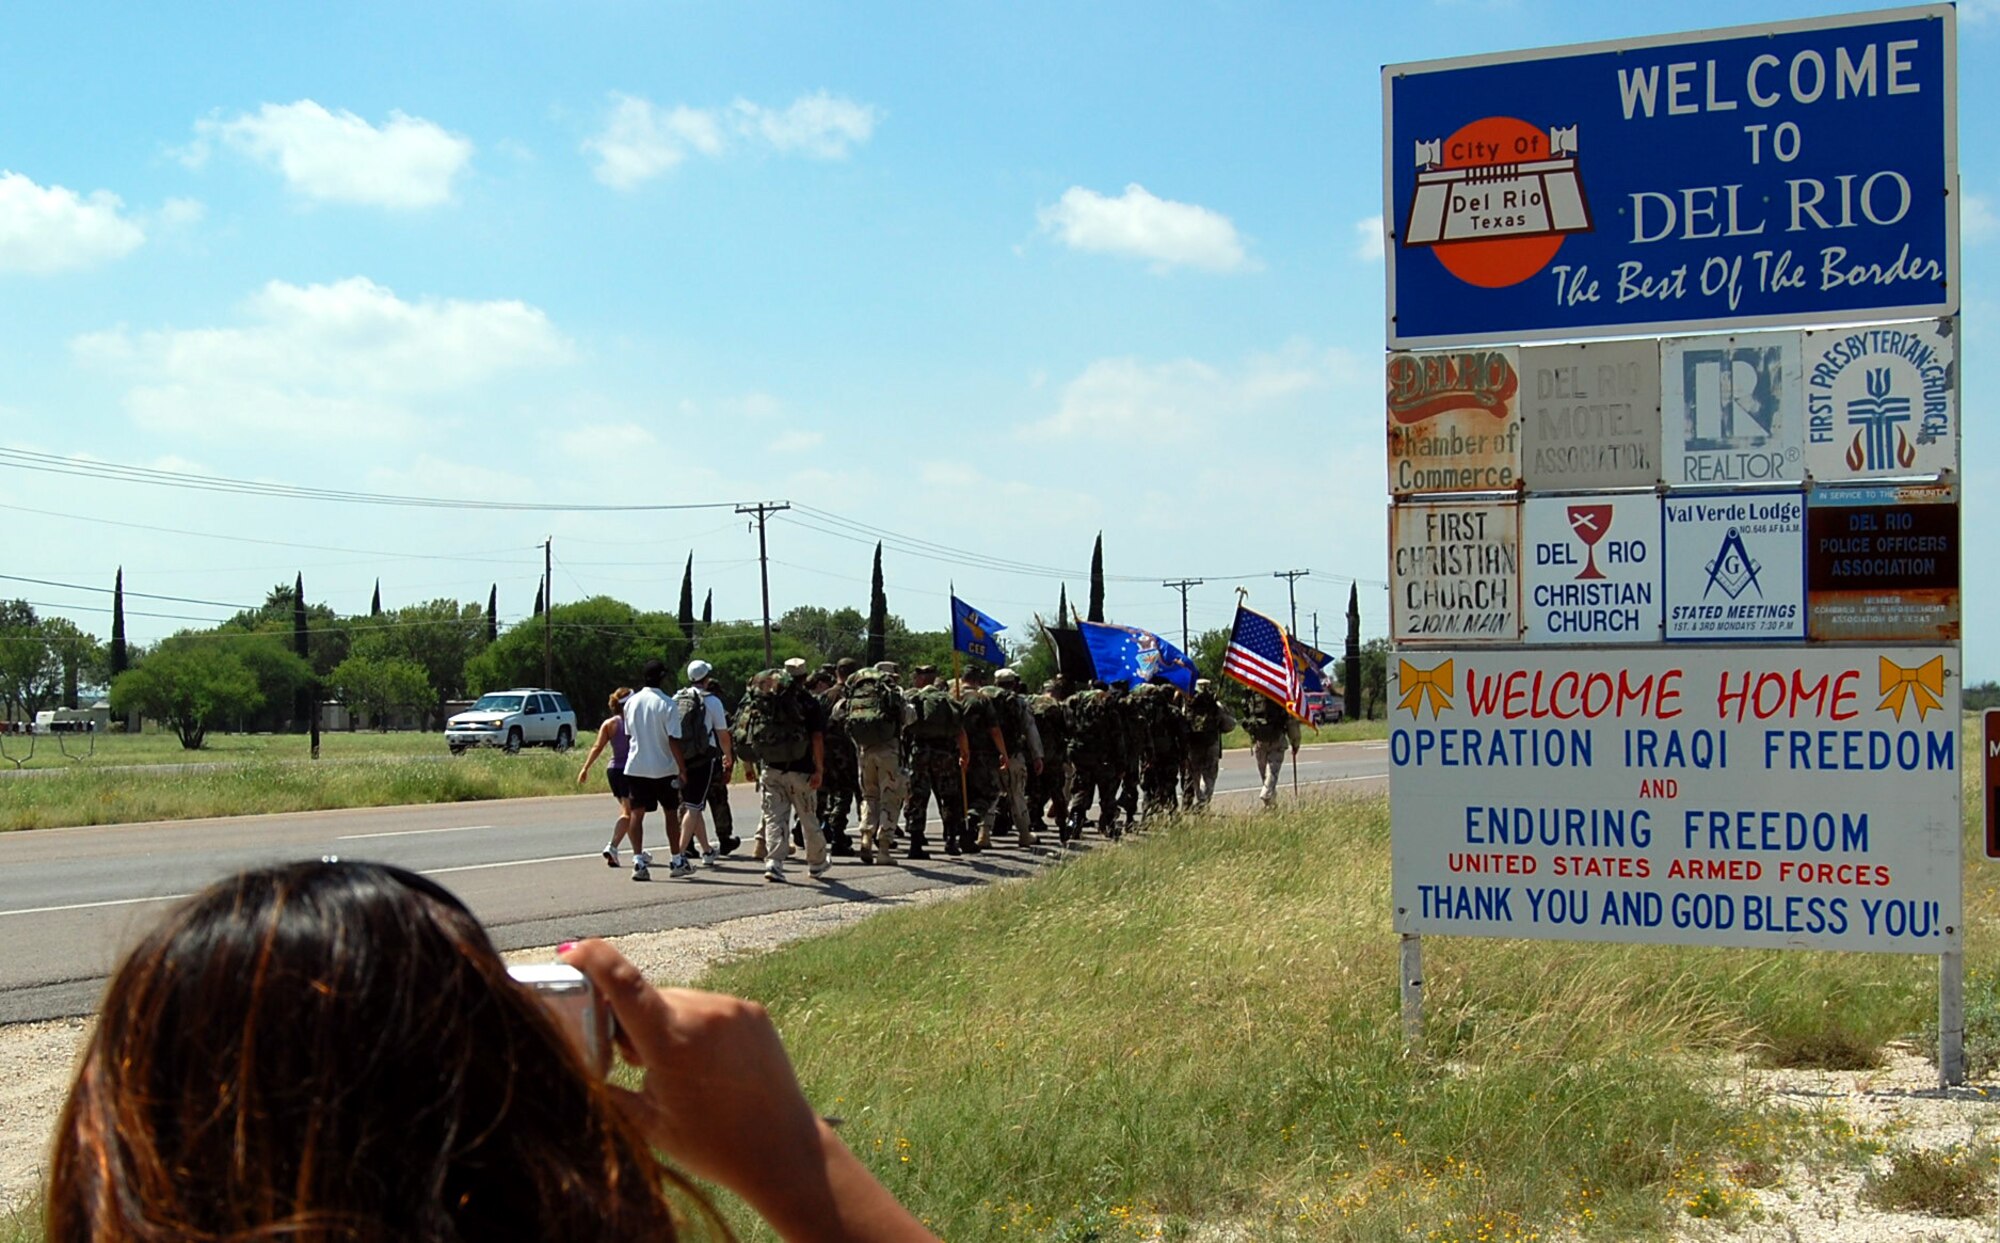 LAUGHLIN AIR FORCE BASE, Texas –Members from the 47th Security Forces Squadron and many other volunteers set off on Highway 90 in Del Rio, Texas for the beginning of a 7 mile walk inspired by National POW/MIA Recognition Day, and in honor of local fallen heroes such as Airman 1st Class Raymond Losano, Army Pvt. Oscar Sauceda Jr. and Army Staff Sgt. Jose Lanzarin, Sept. 21. (U.S Air Force photo by Tech. Sgt. Joel Langton)